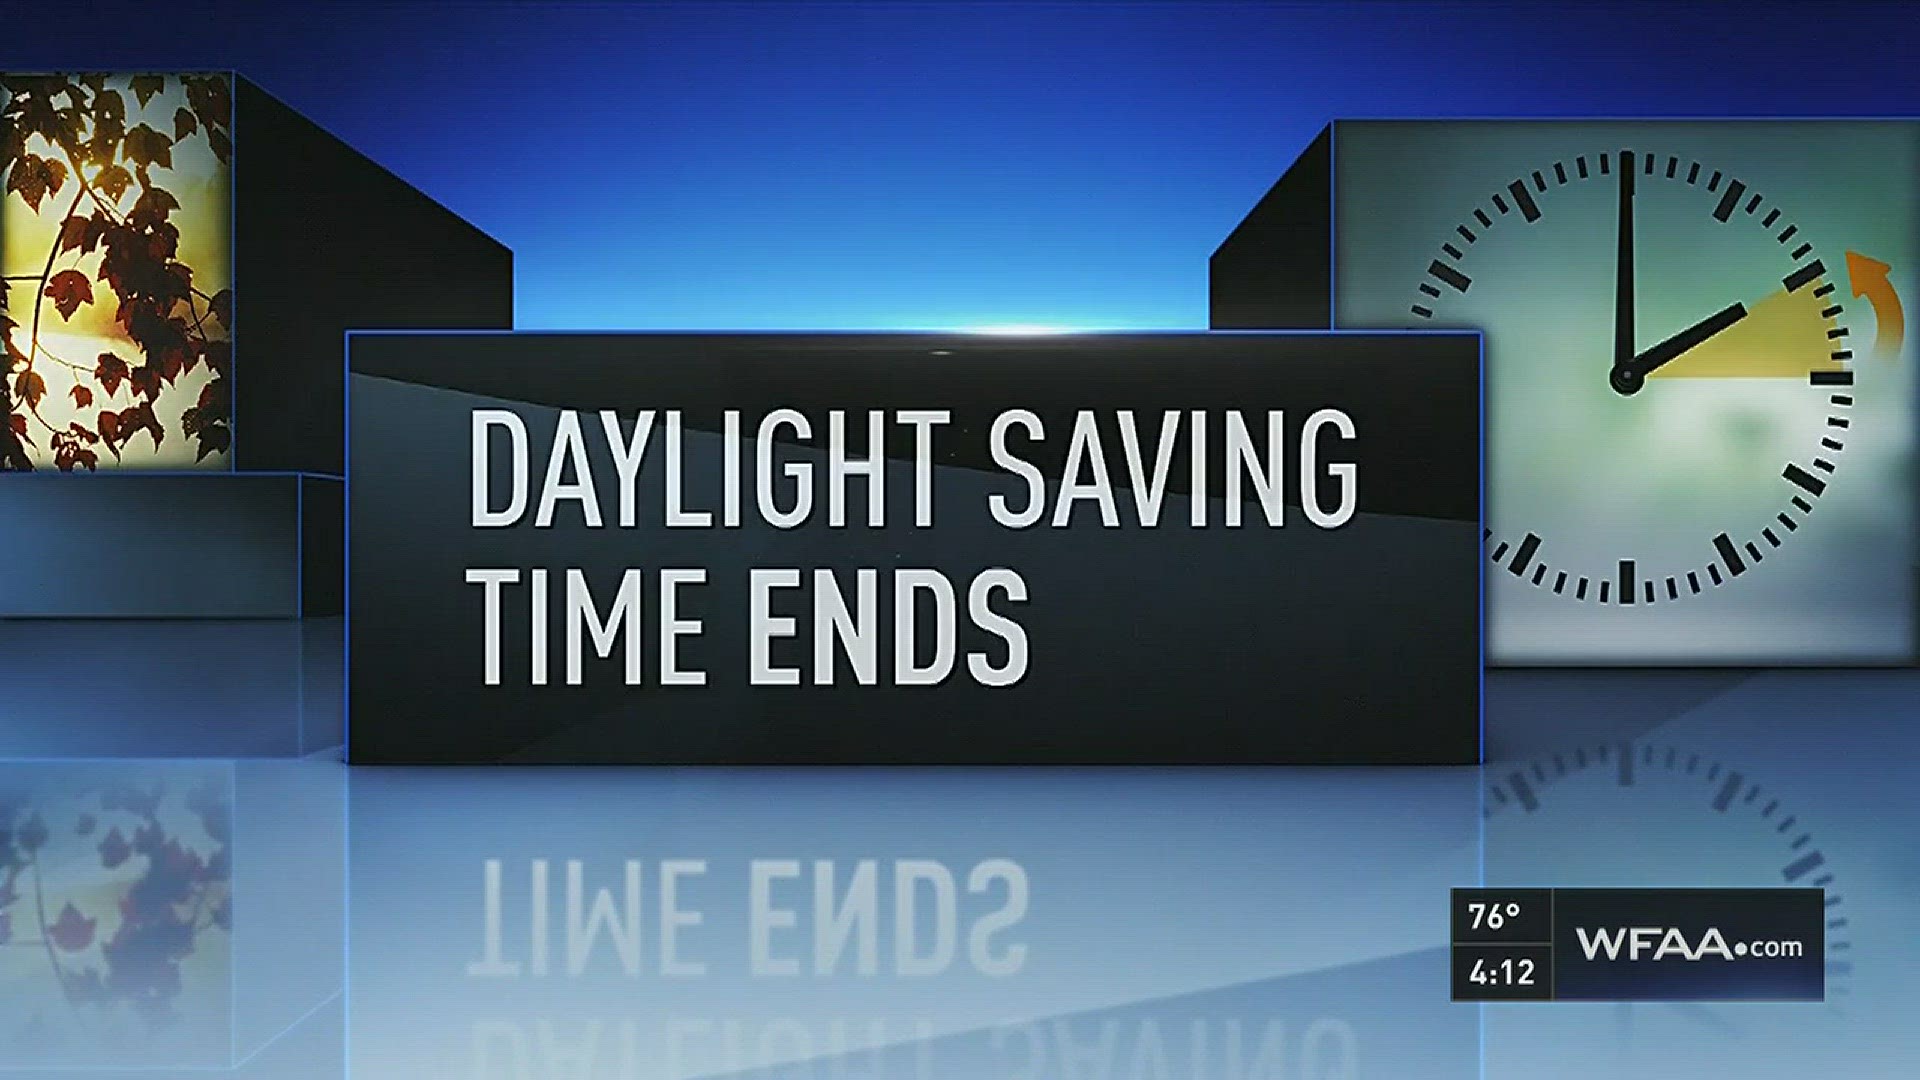 Jason Wheeler talks to Mary Cantwell about how to adjust to the end of Daylight Saving time.